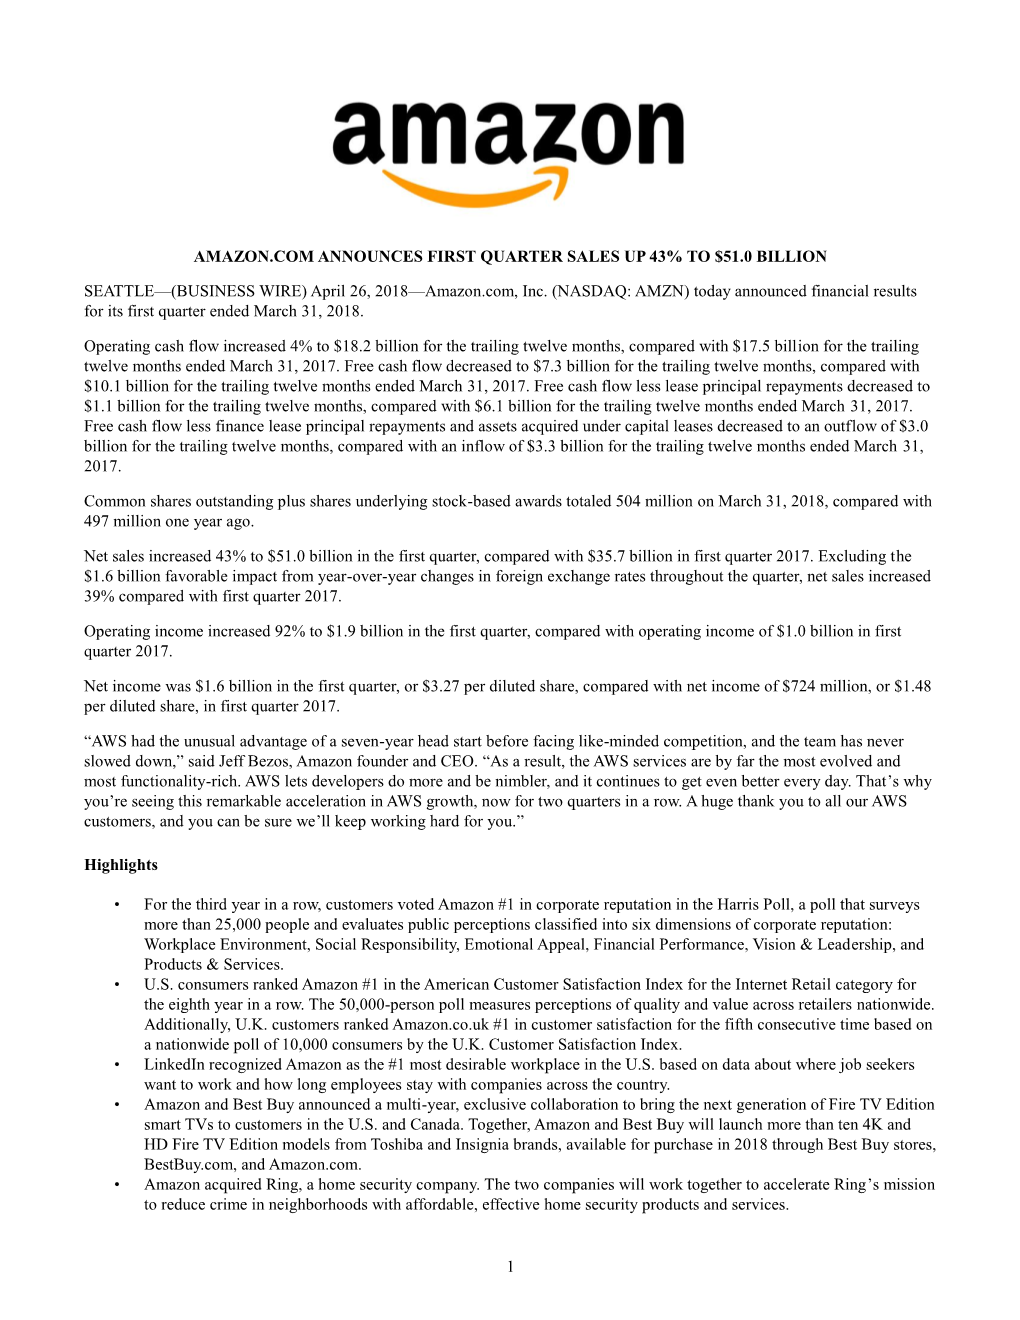 April 26, 2018—Amazon.Com, Inc. (NASDAQ: AMZN) Today Announced Financial Results for Its First Quarter Ended March 31, 2018